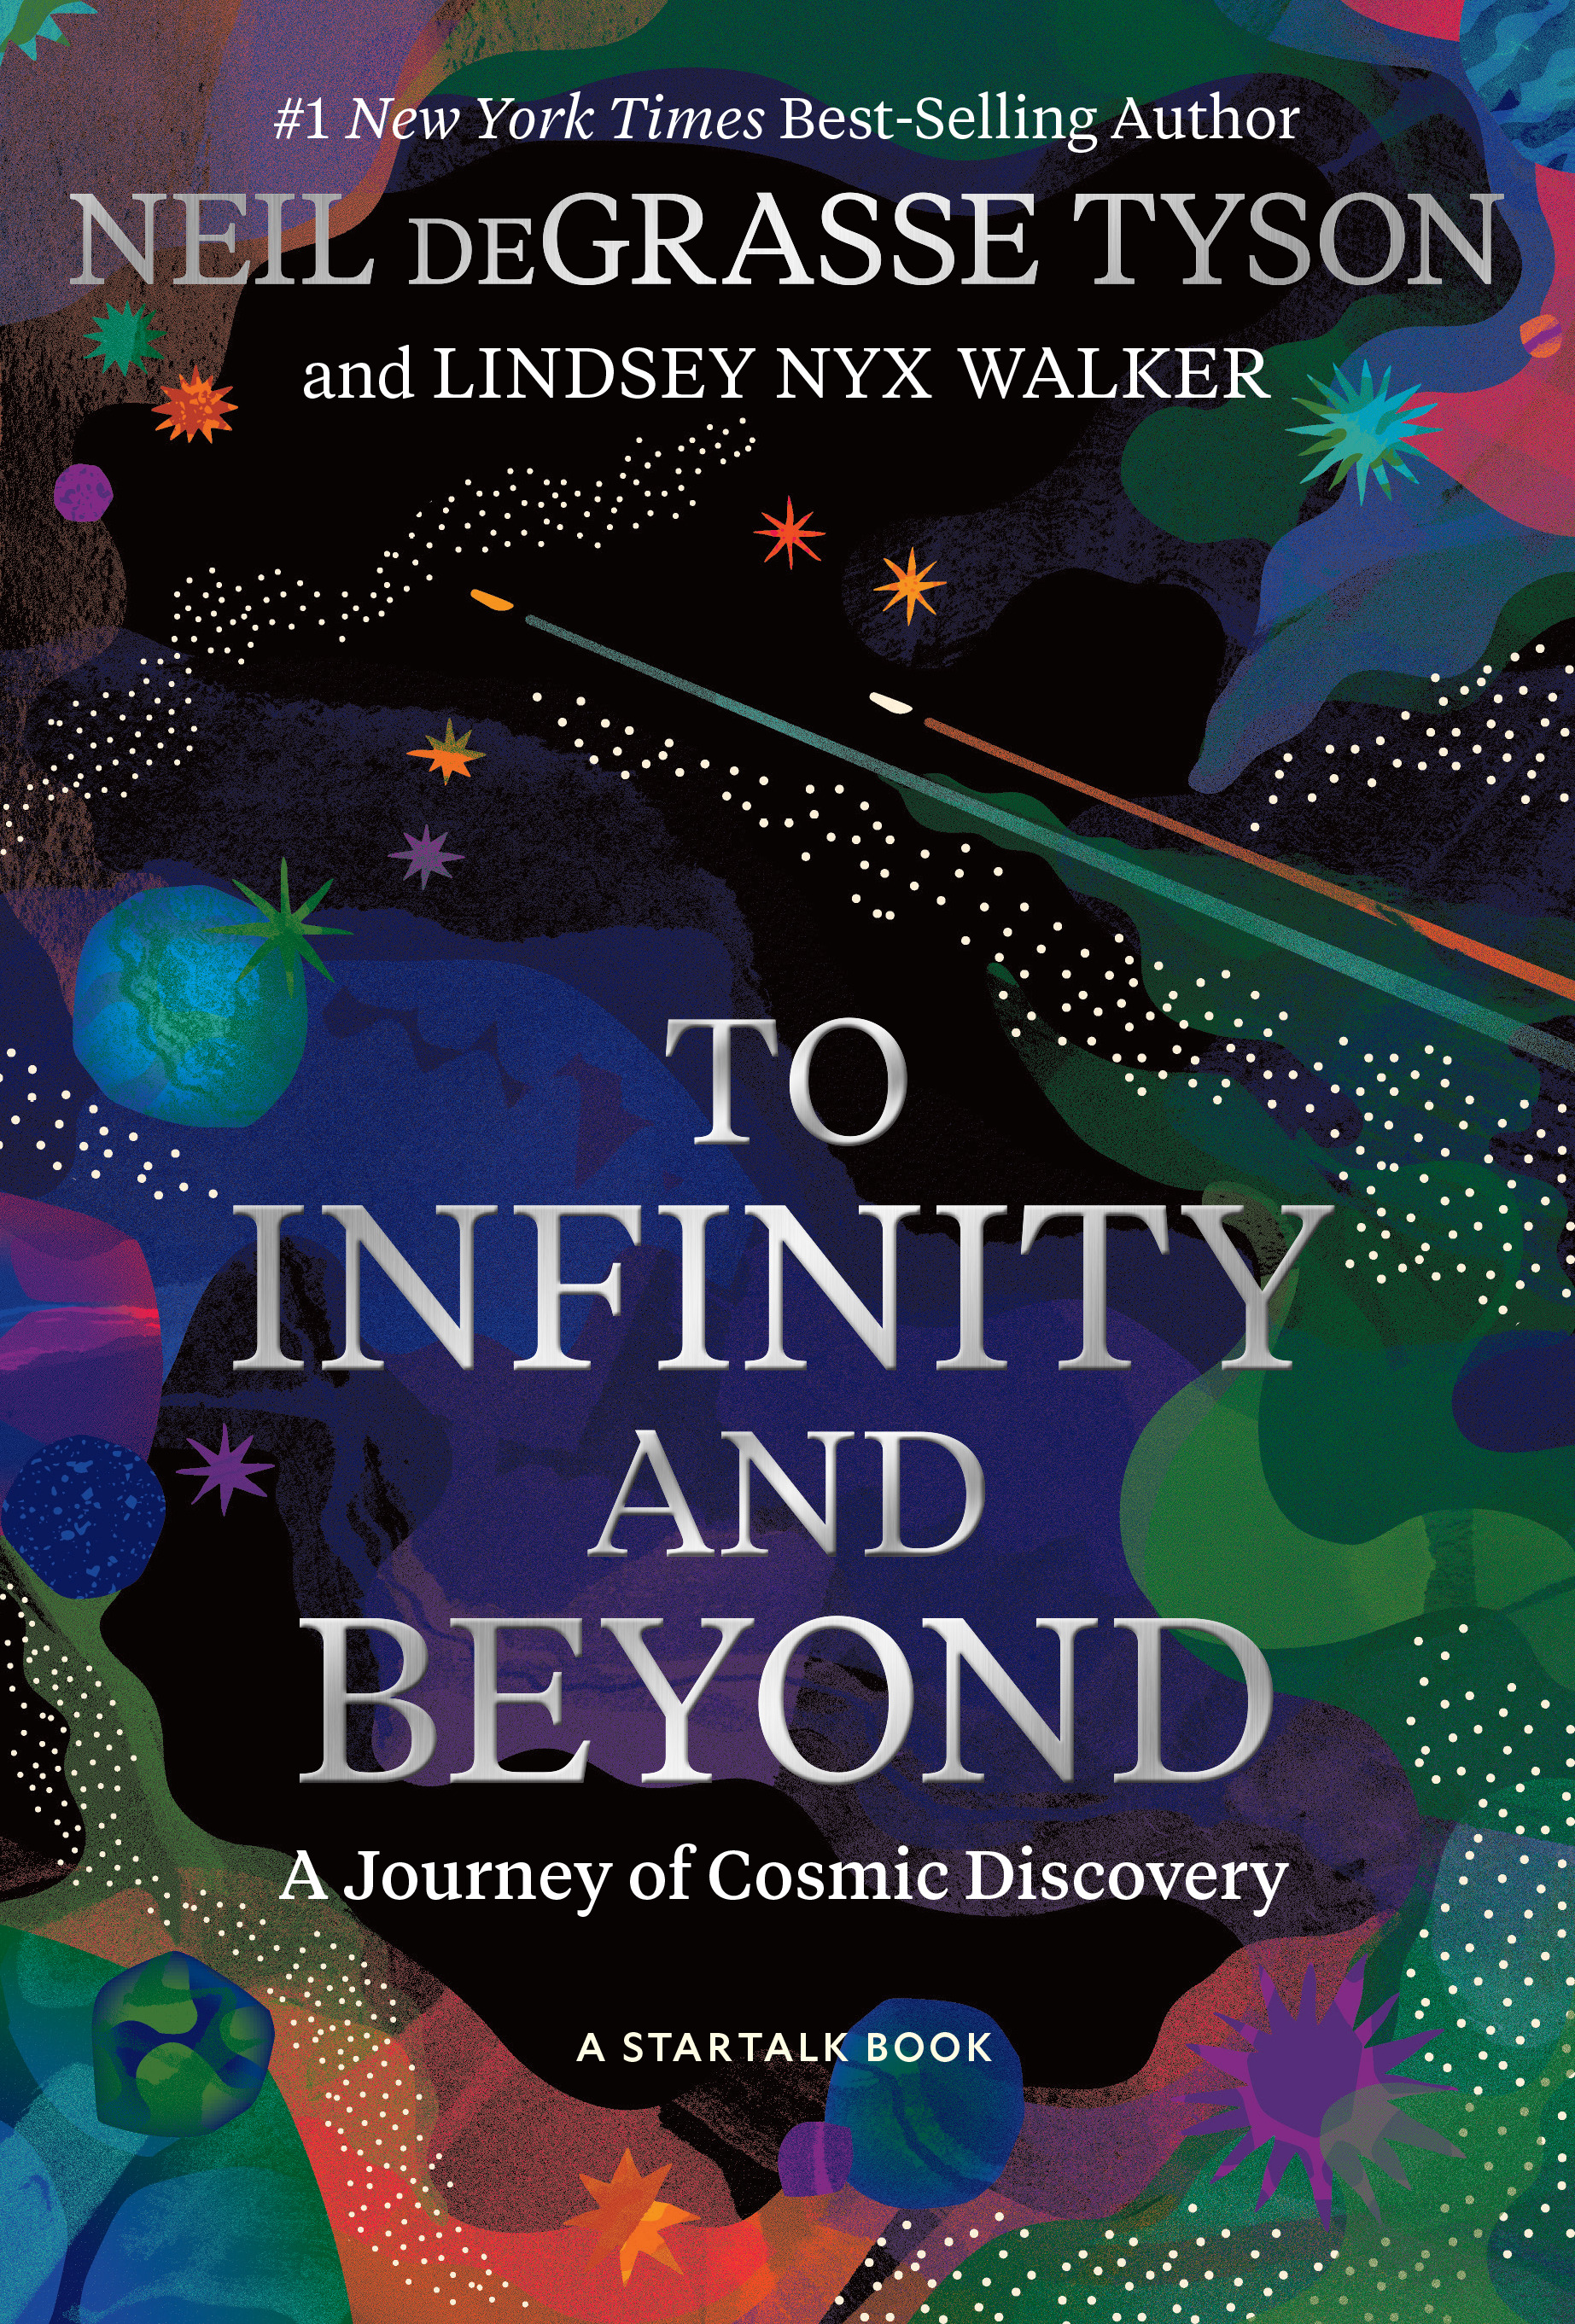 Link to To Infinity and Beyond book.